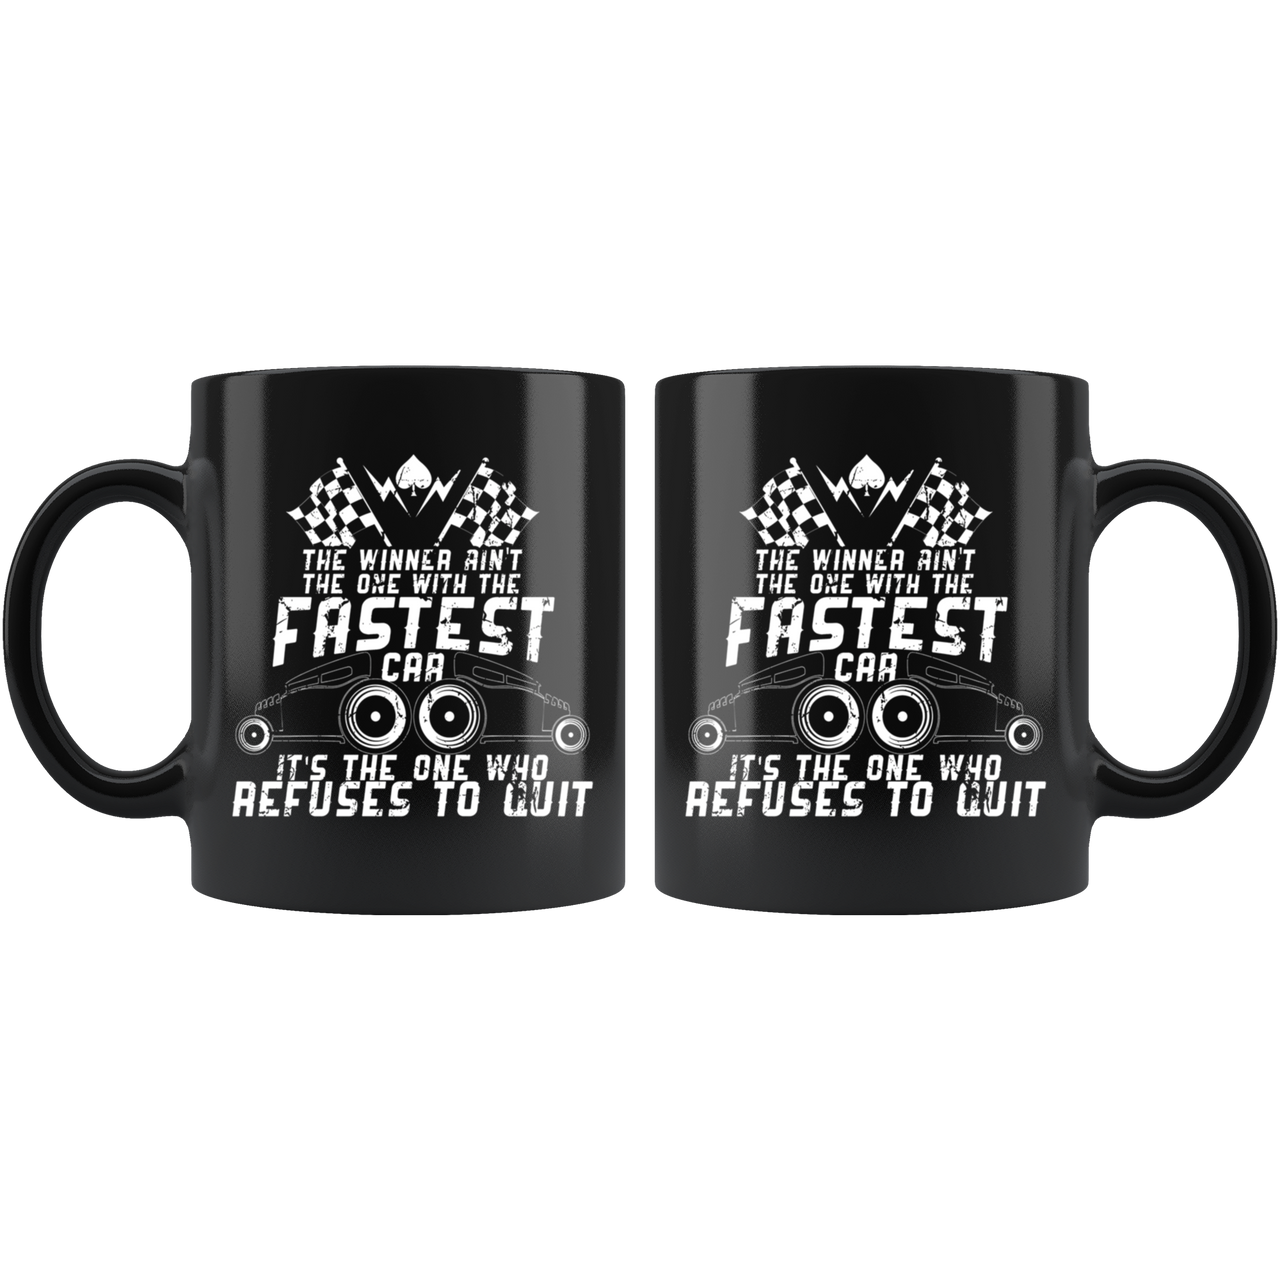 The Winner Ain't The One With The Fastest Car It's The One Who Refused To Quit Mug!